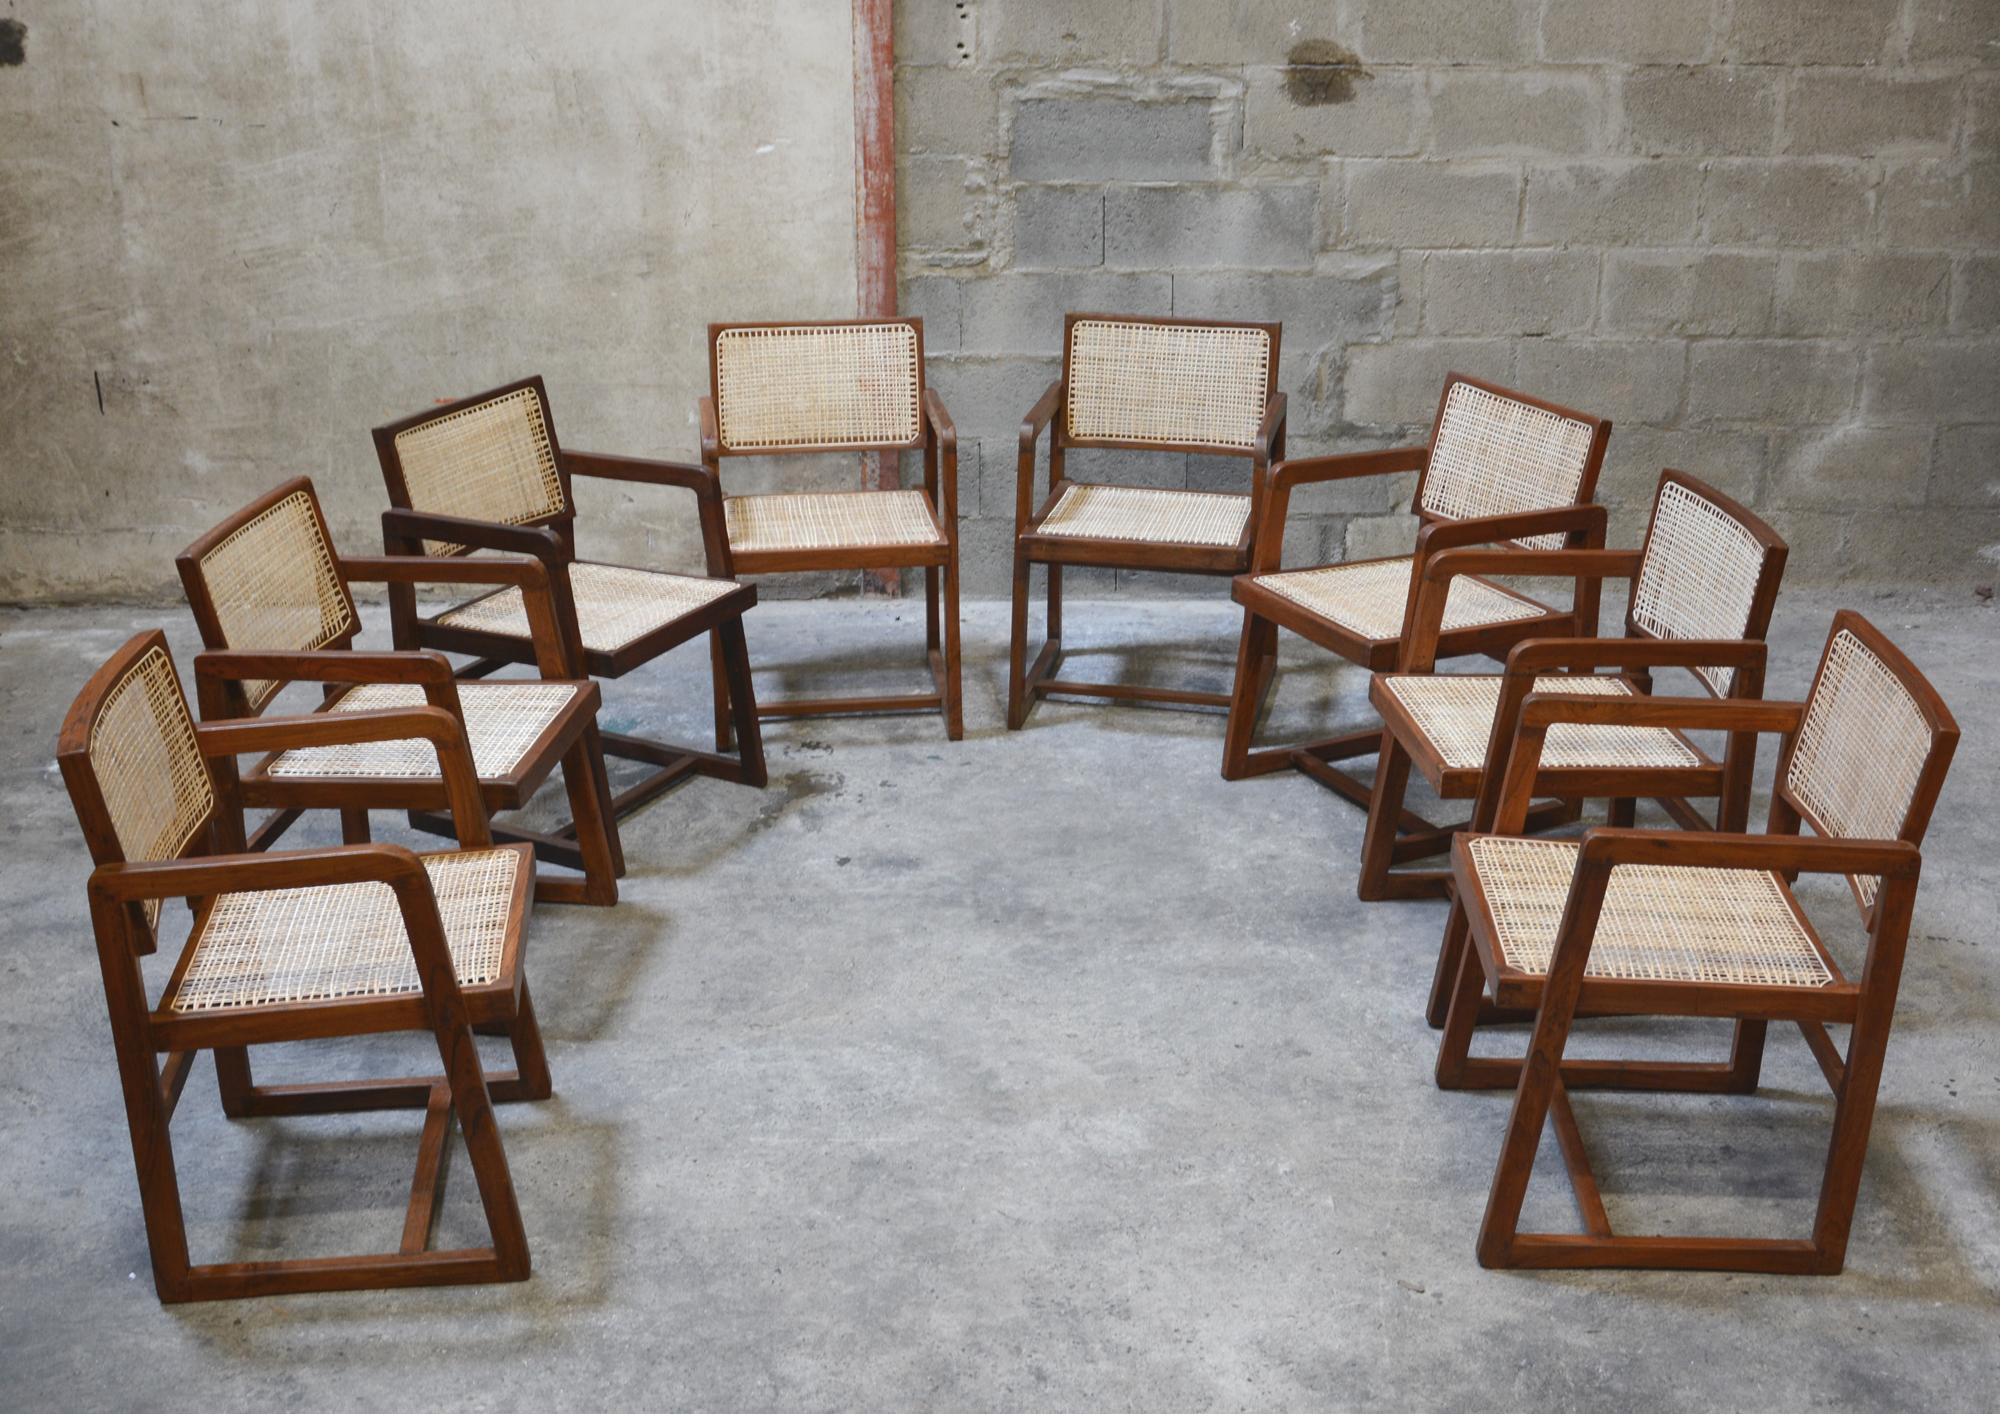 Pierre Jeanneret, rare set of 8 cane and teakwood Chairs designed for P.U. University Library in Chandigarh (1966), India. Teak, woven cane and upholstered new seat cushion featuring cloth covering. 

7 Chairs have their original lettering (see